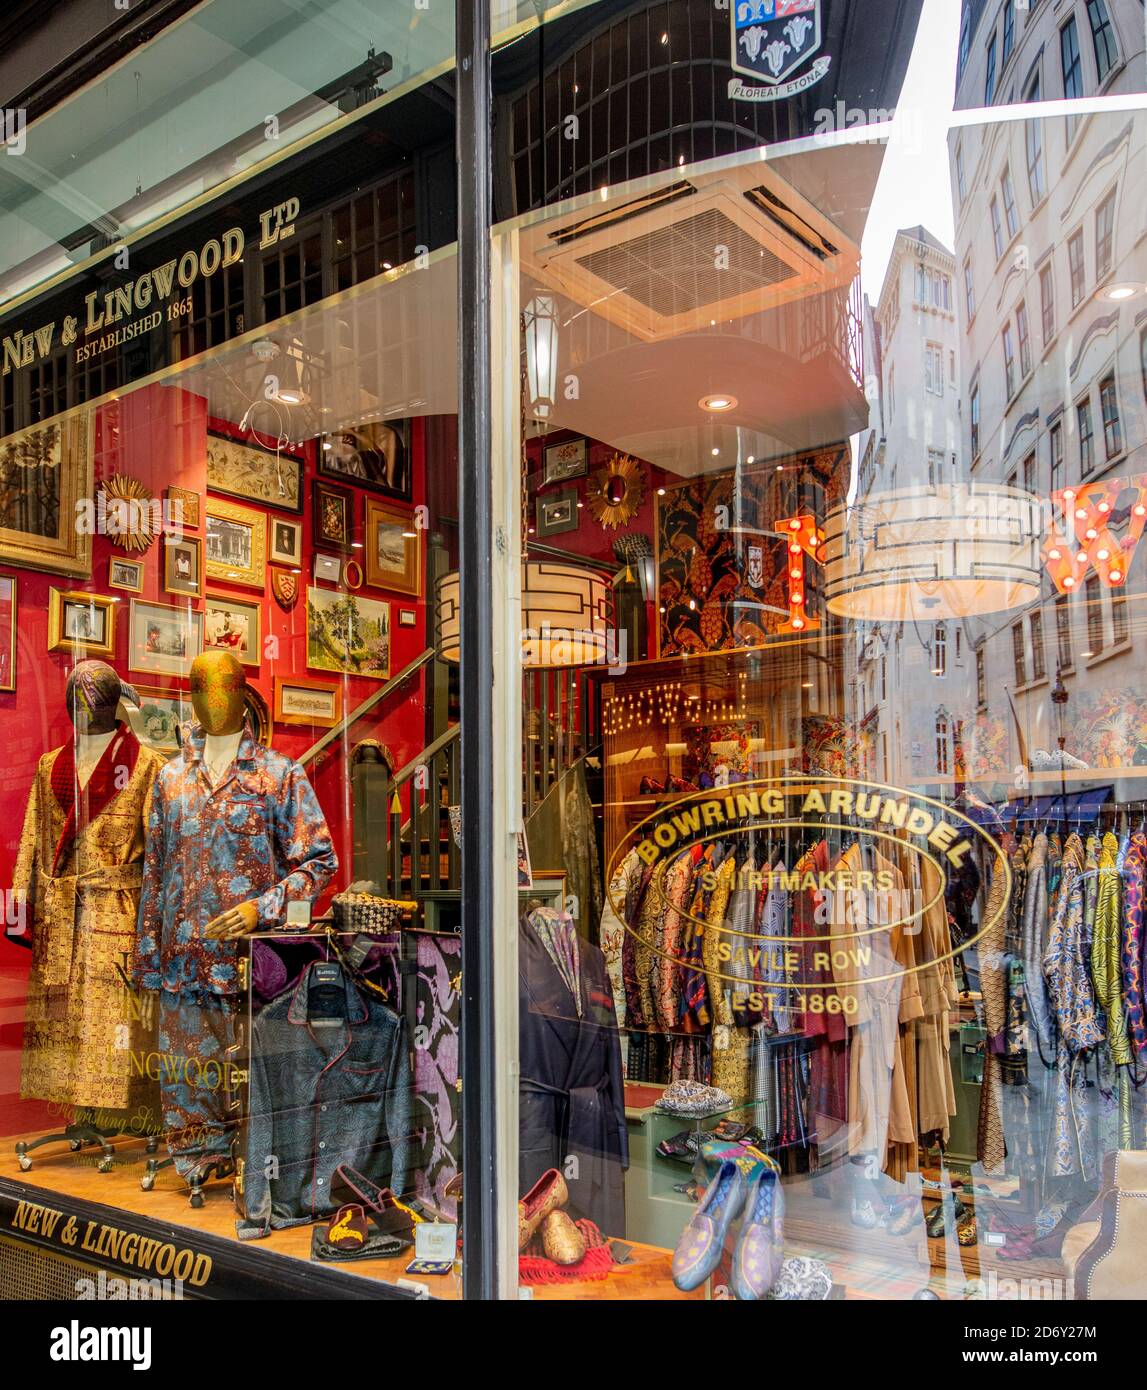 Window of New and Lingwood, gentlemen's outfitters in Jermyn St, Londo Stock Photo